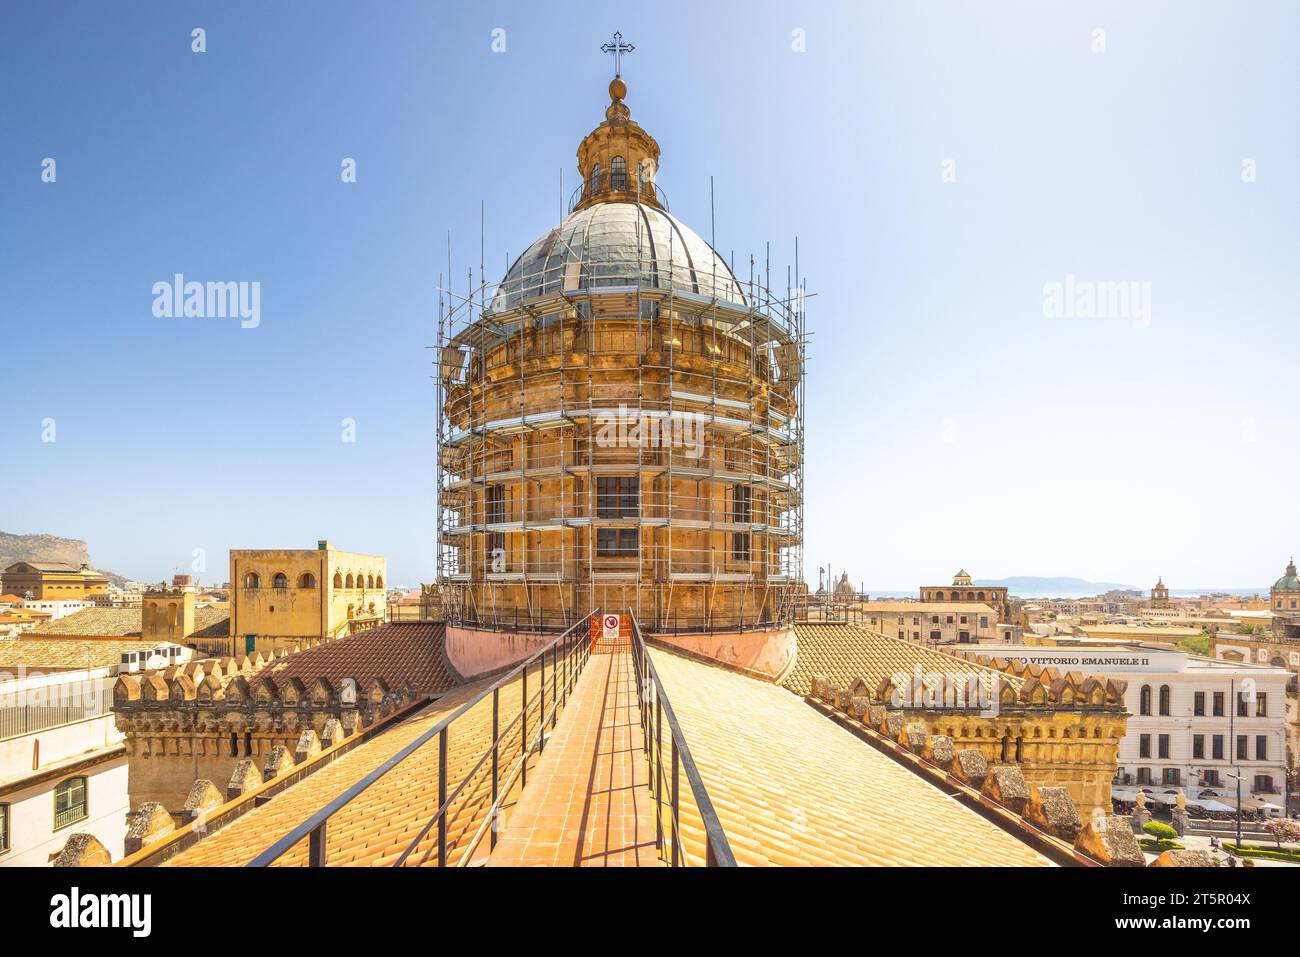 PALERMO, ITALY - JULY 18, 2023: Palermo Cathedral, view of cupola from roof of cathedral, a major landmark and tourist attraction in capital of Sicily Stock Photo